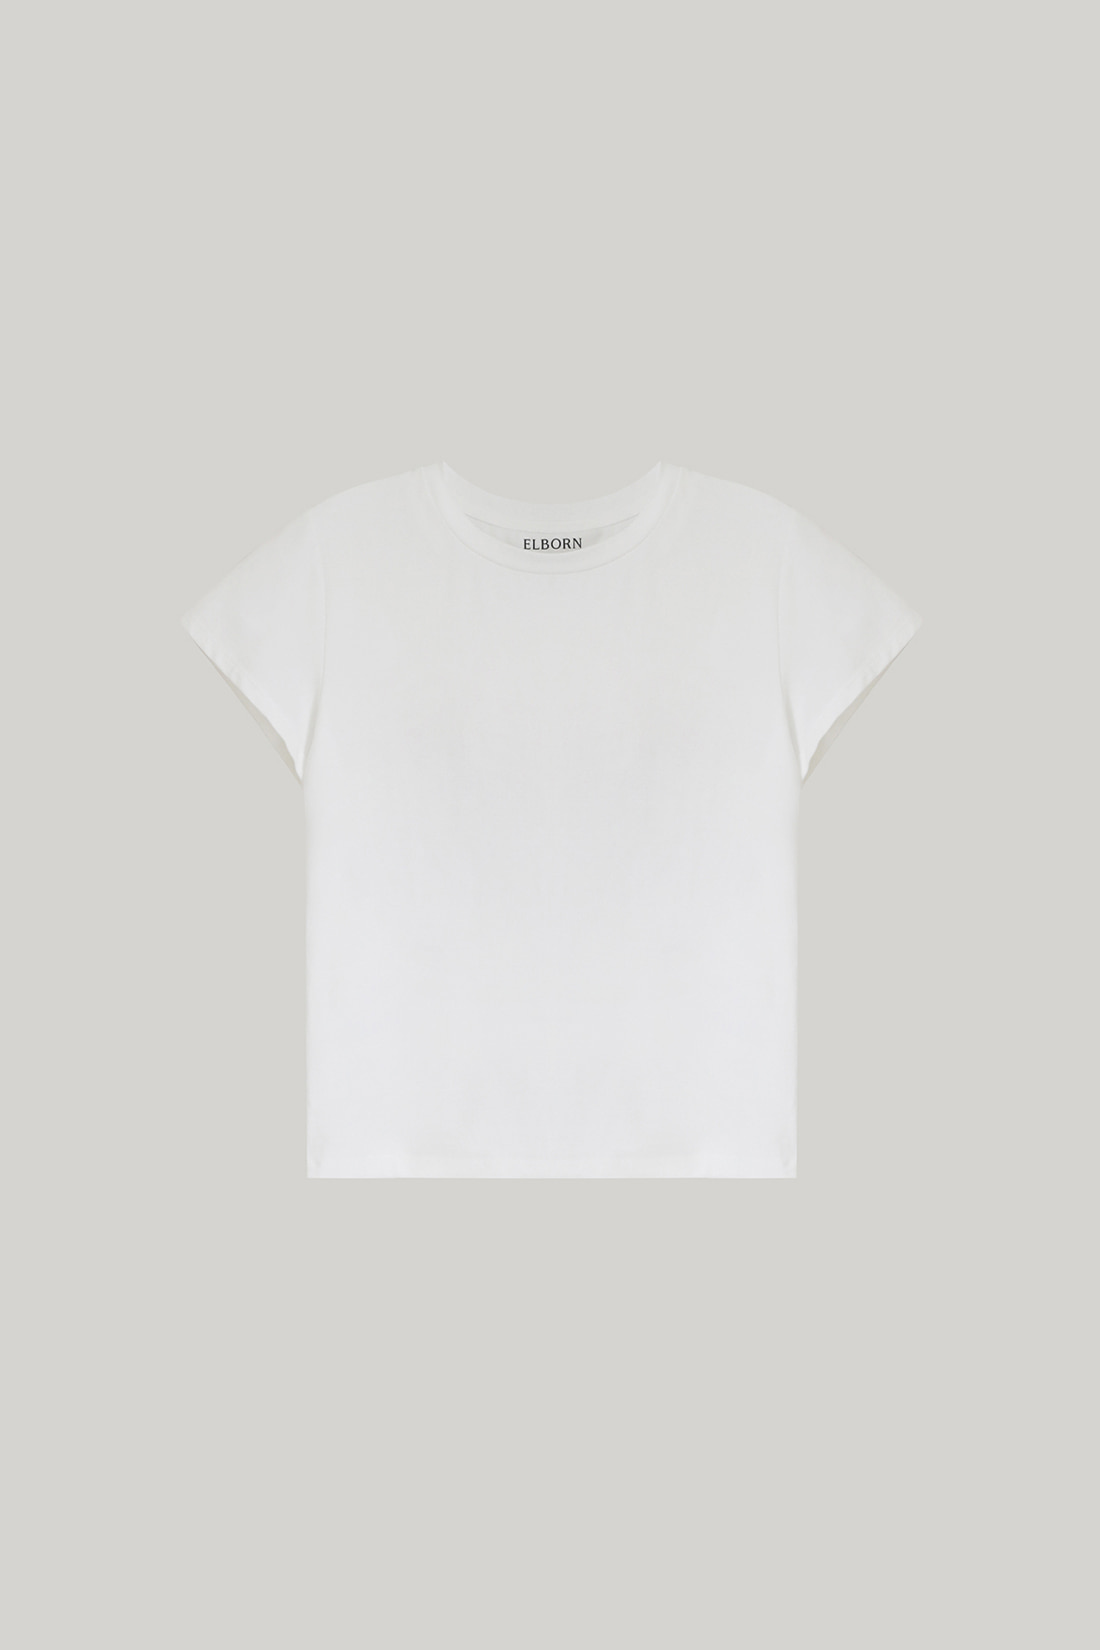 2ND / Damia T-shirt (4colors)